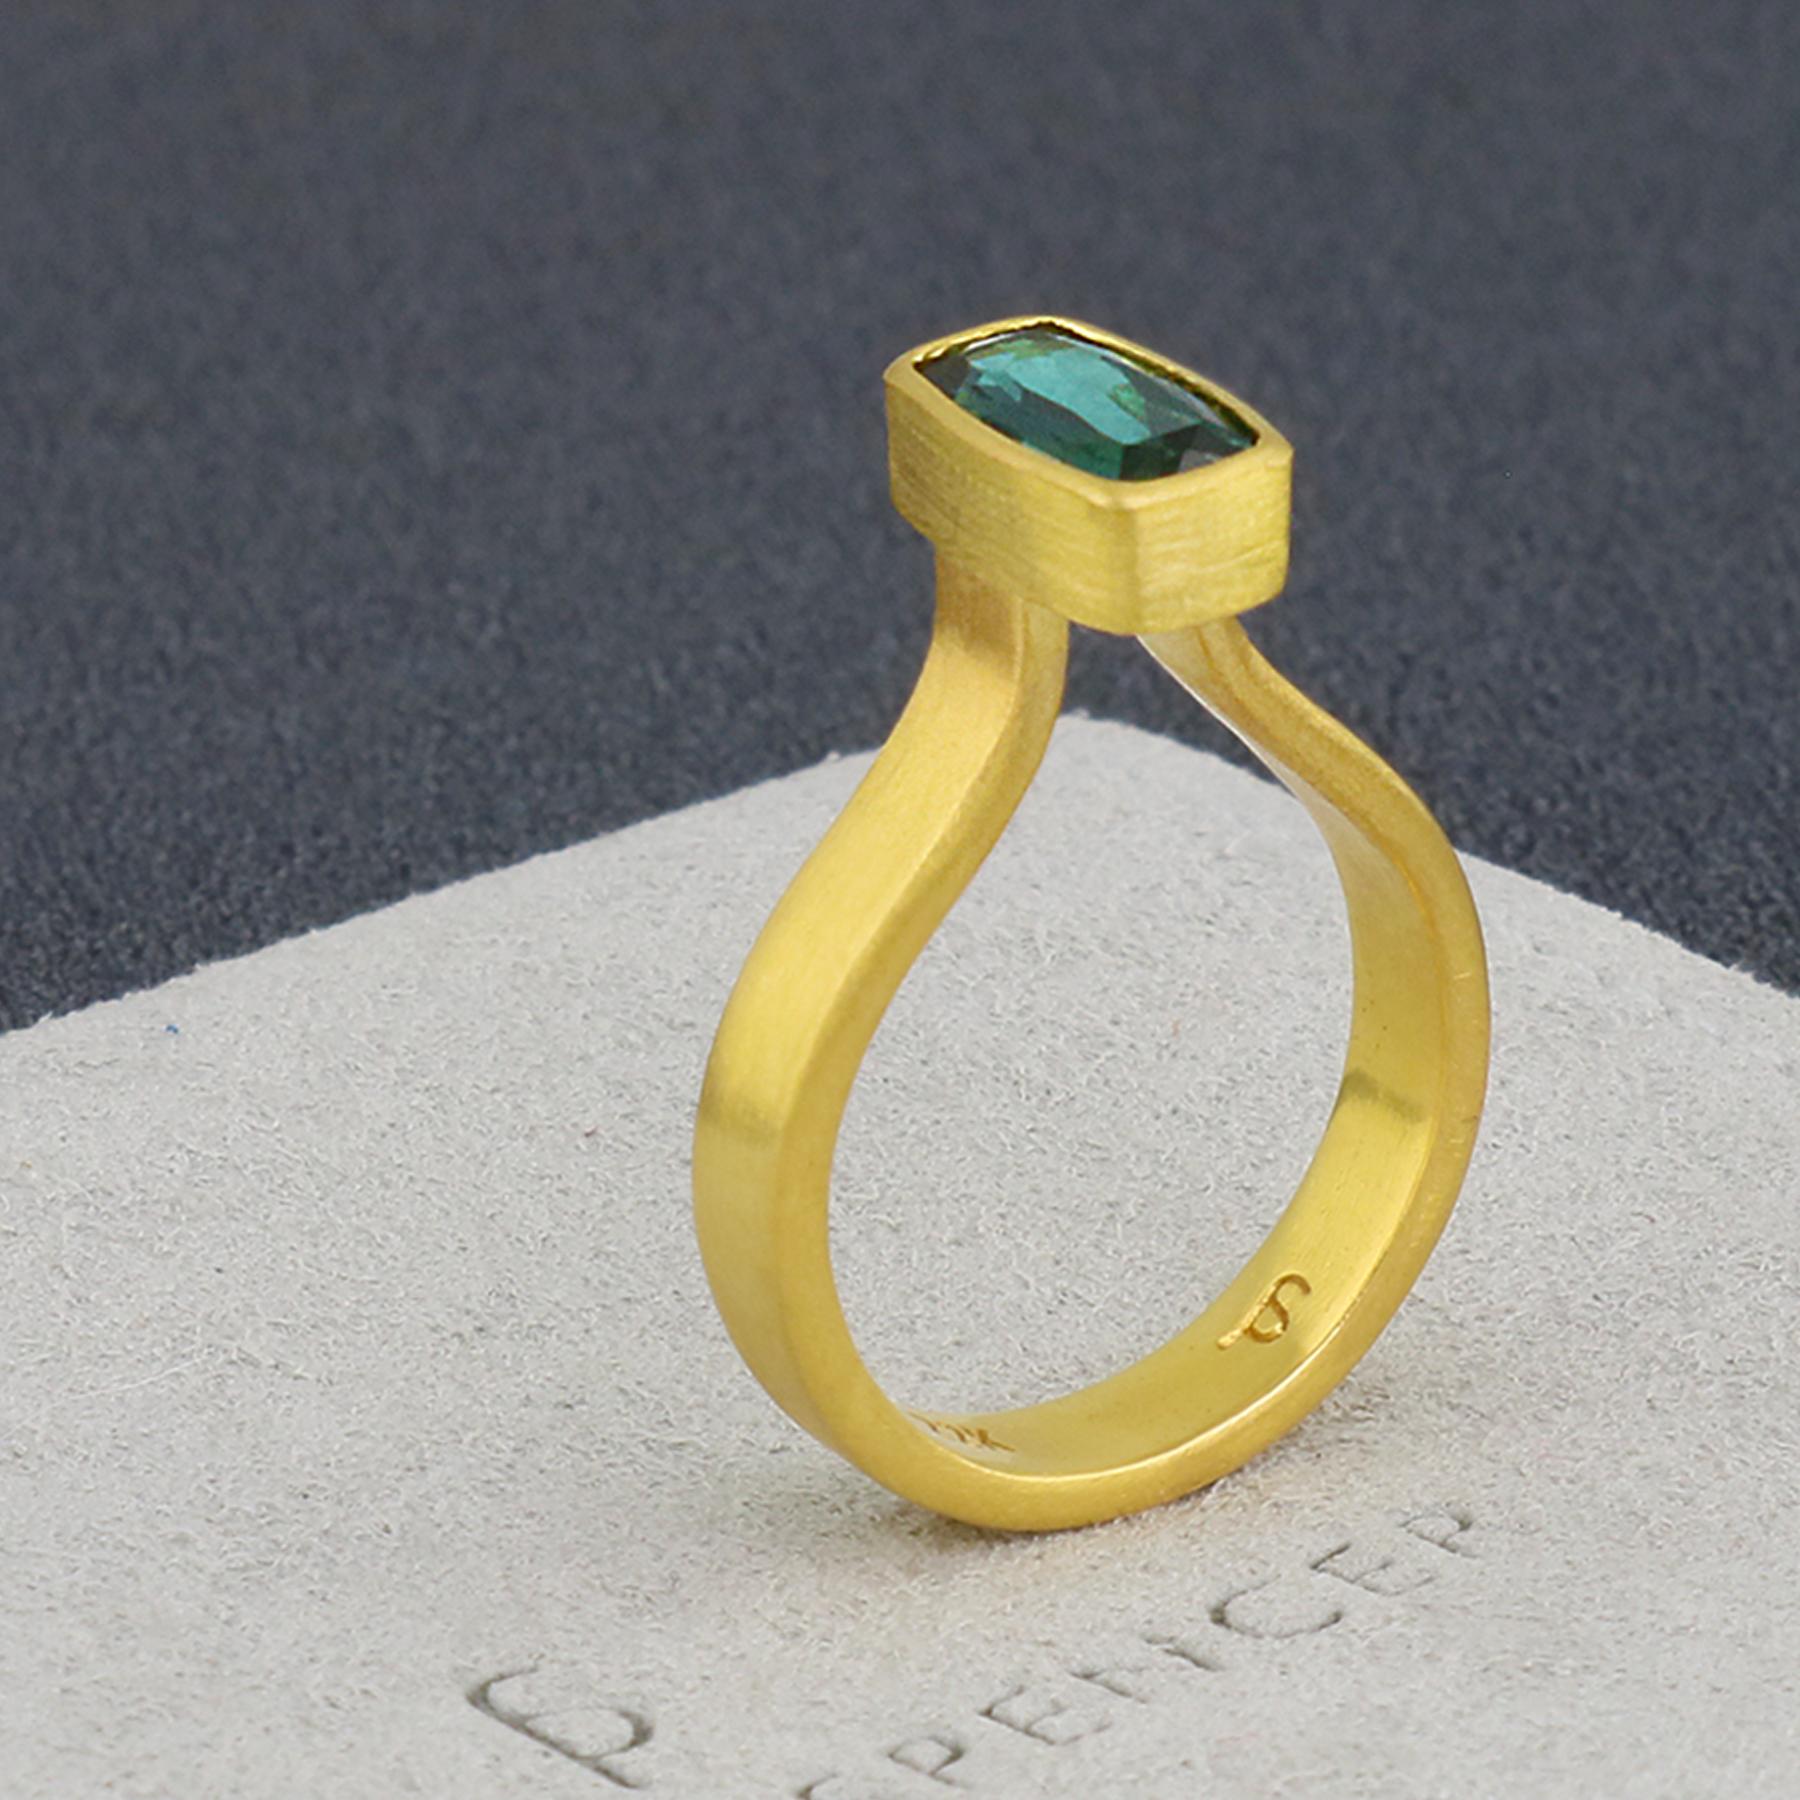 PHILIPPE SPENCER - Solid 22K Gold Completely Hand -Forged One-Of-A-Kind Statement Ring with 1.6 Ct. Teal Tourmaline High-Set in backless 22K Gold Setting. Heavy Matte Brushed Finish. Size 6 1/2 to 6 3/4, and is in-stock and ready to ship. Our